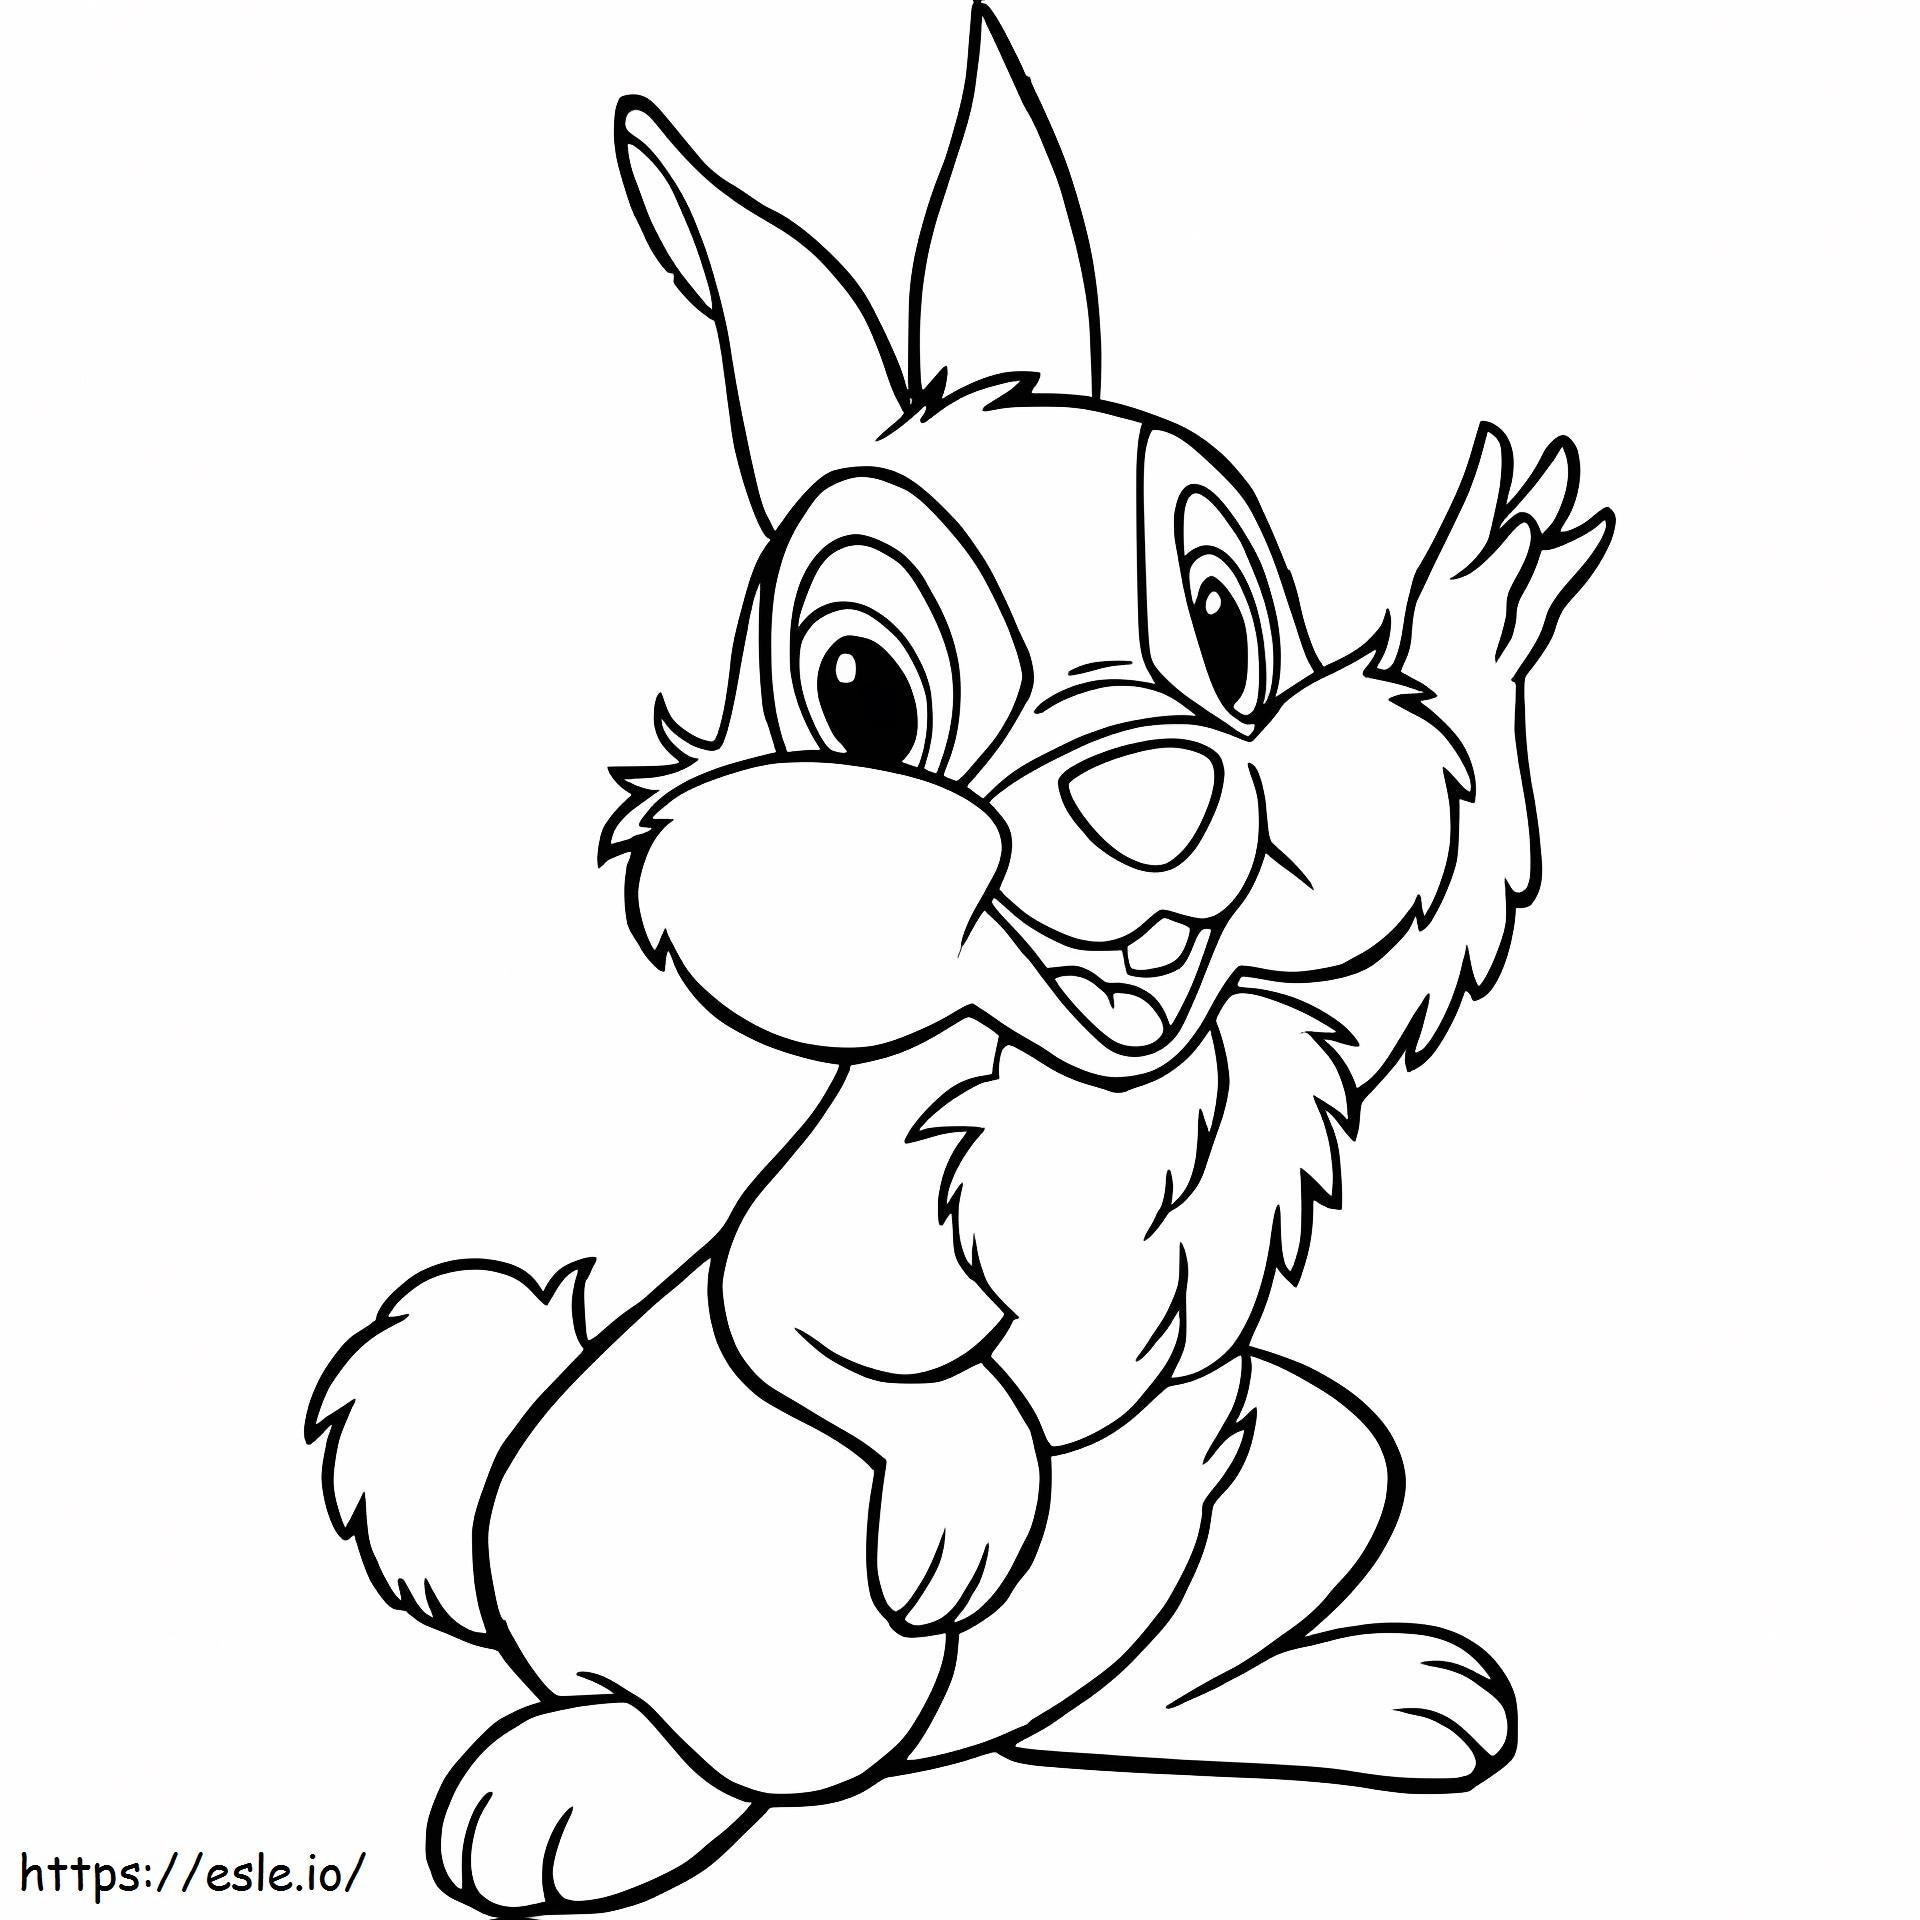 Disney Character Thumper coloring page